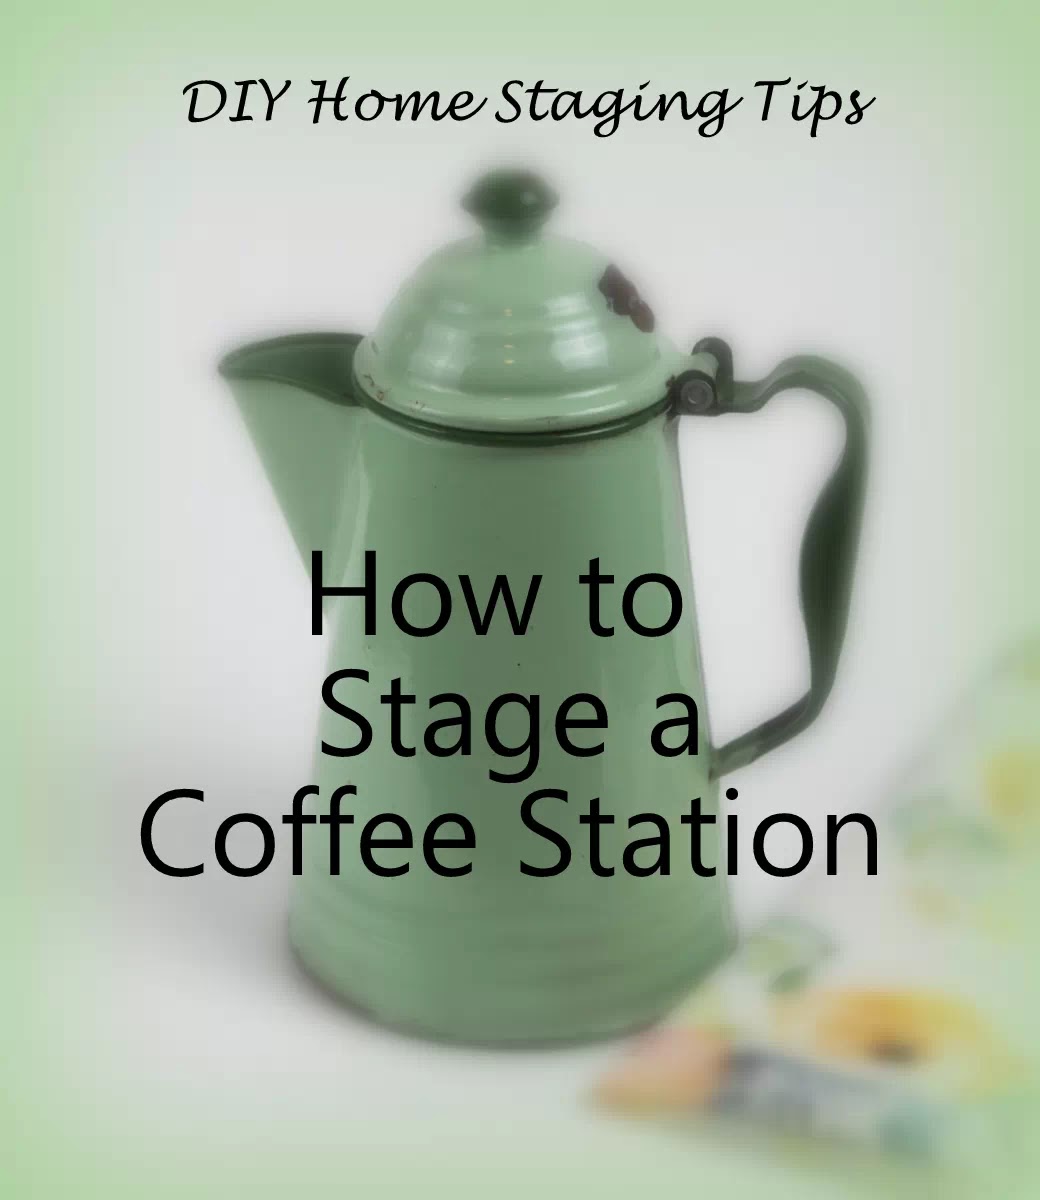 How to Make a Coffee Station Part of Your Home's Staging Strategy